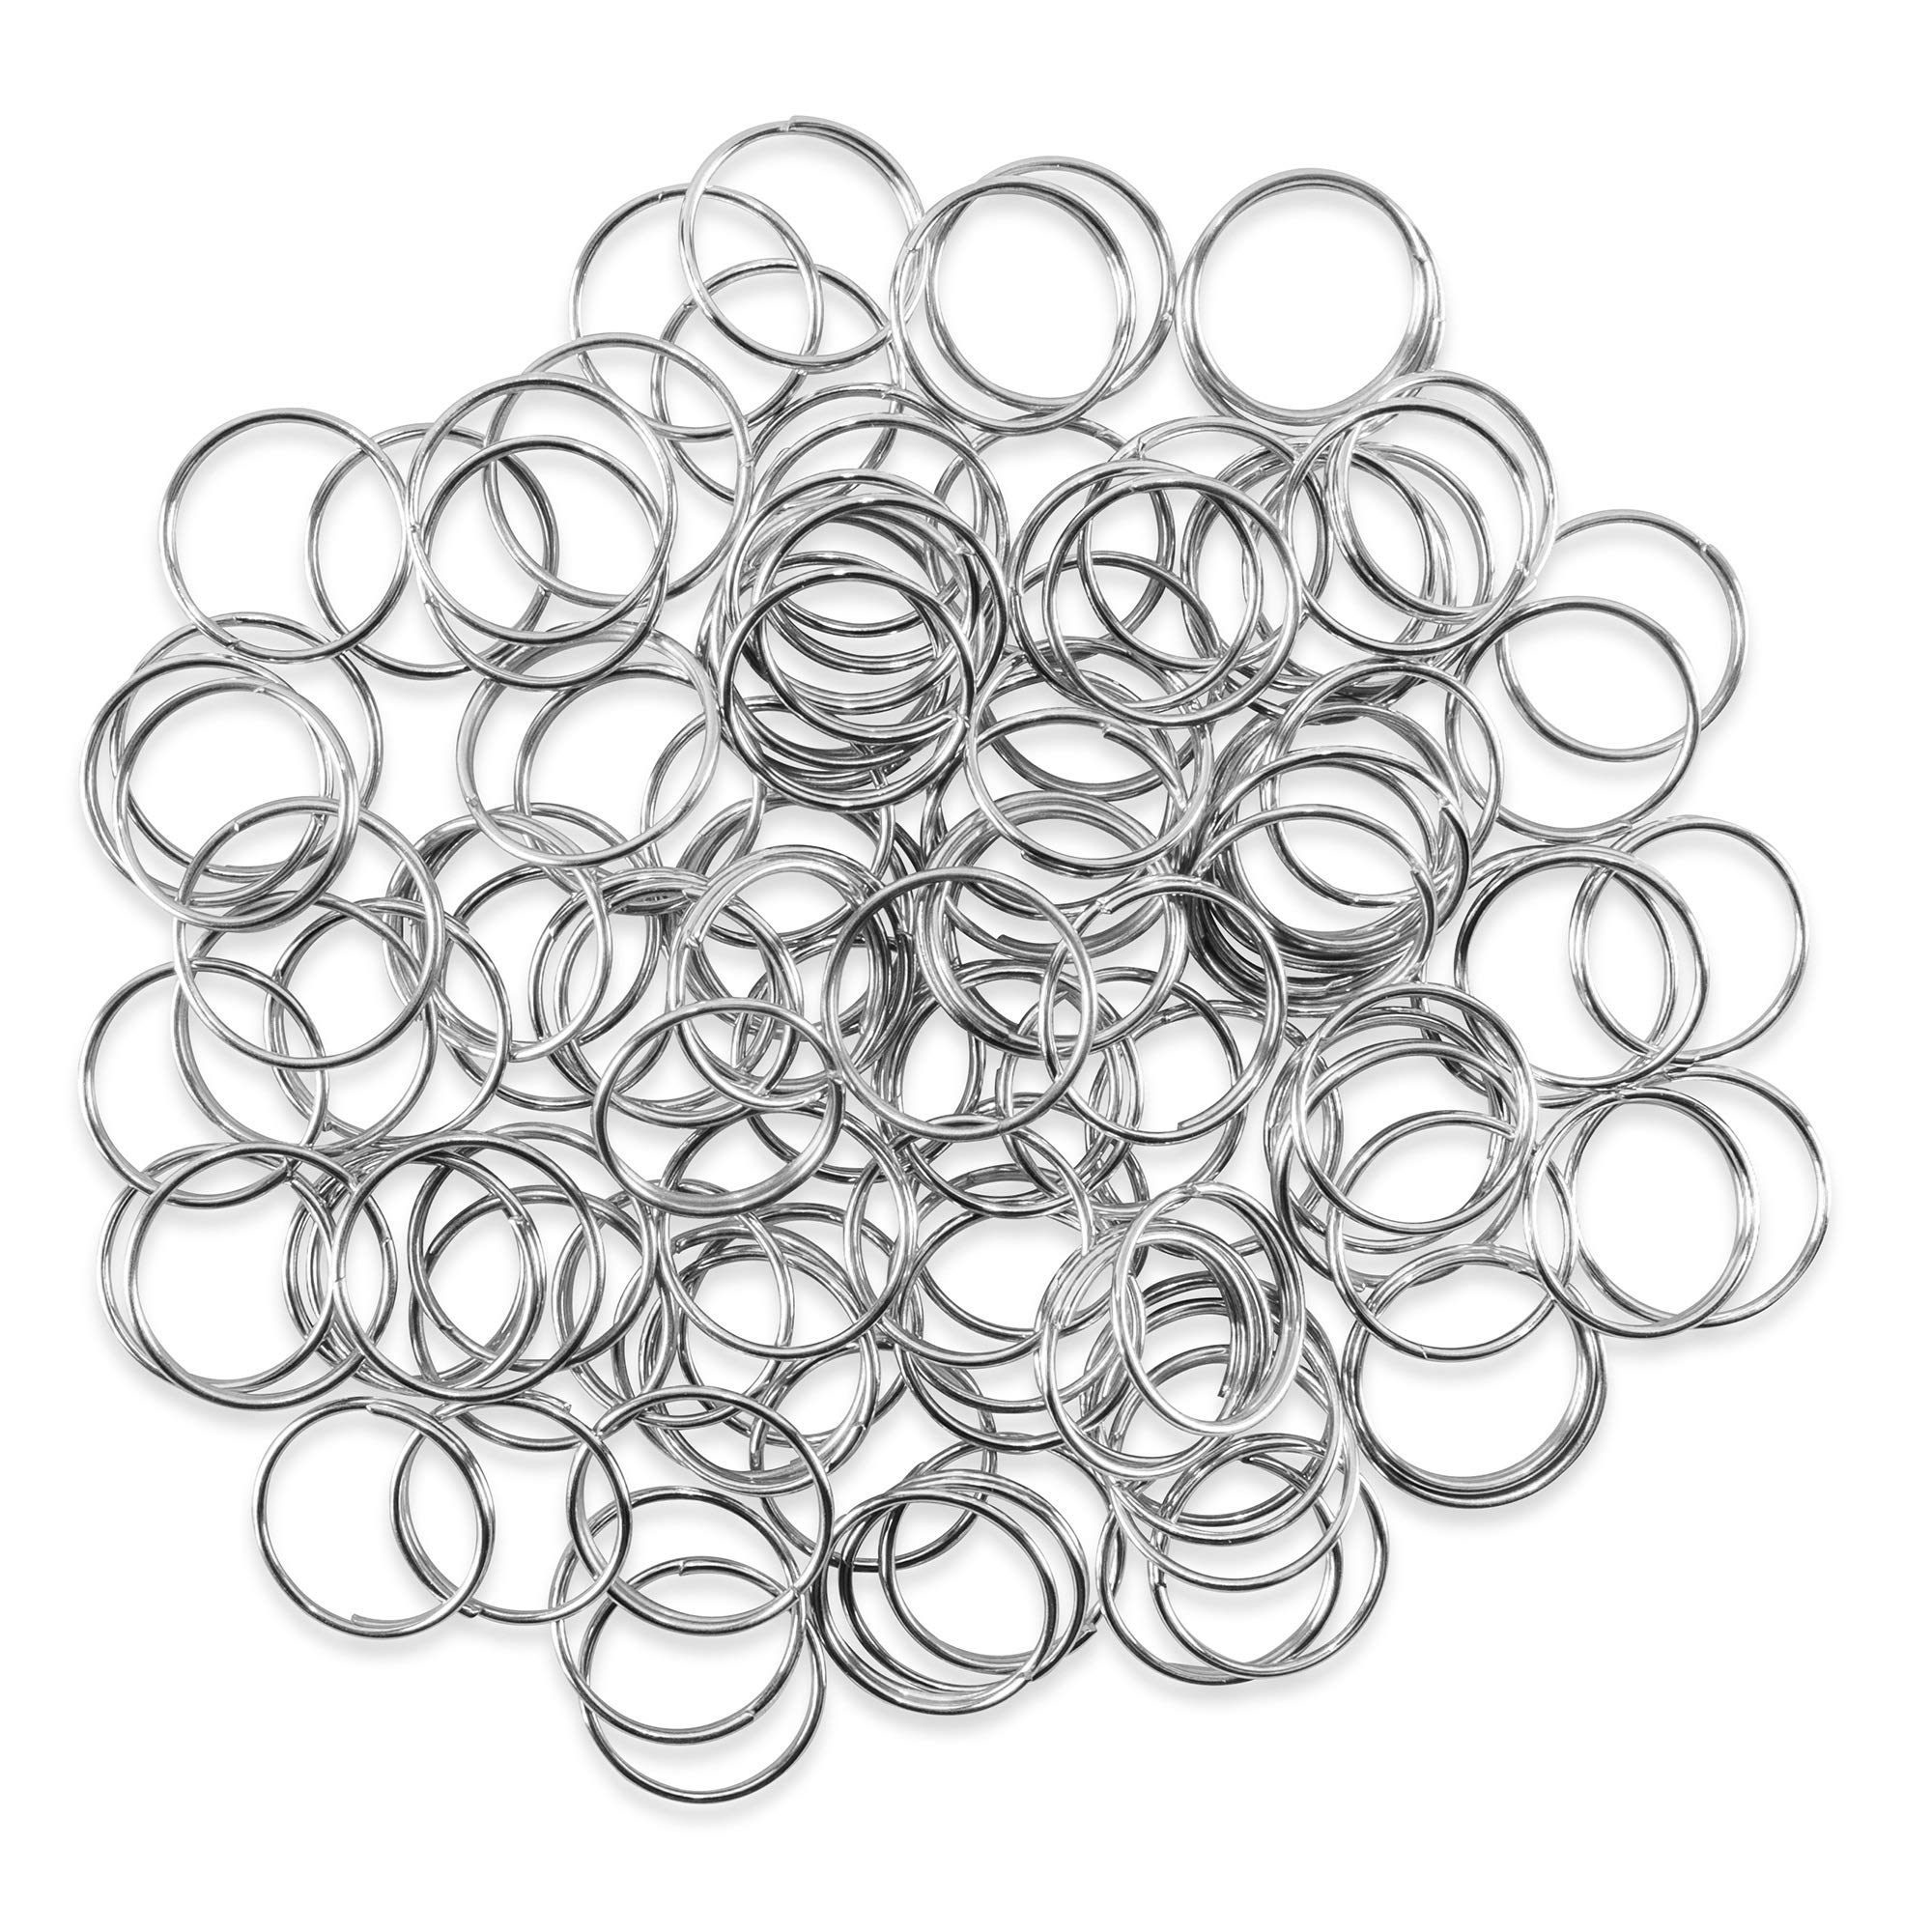 LiQunSweet 20 Pcs 304 Stainless Steel Jump Rings 11x13.5mm Oval Shape Split  Rings for Key Chain Jewelry Crafting Curtain Jewellery Making DIY